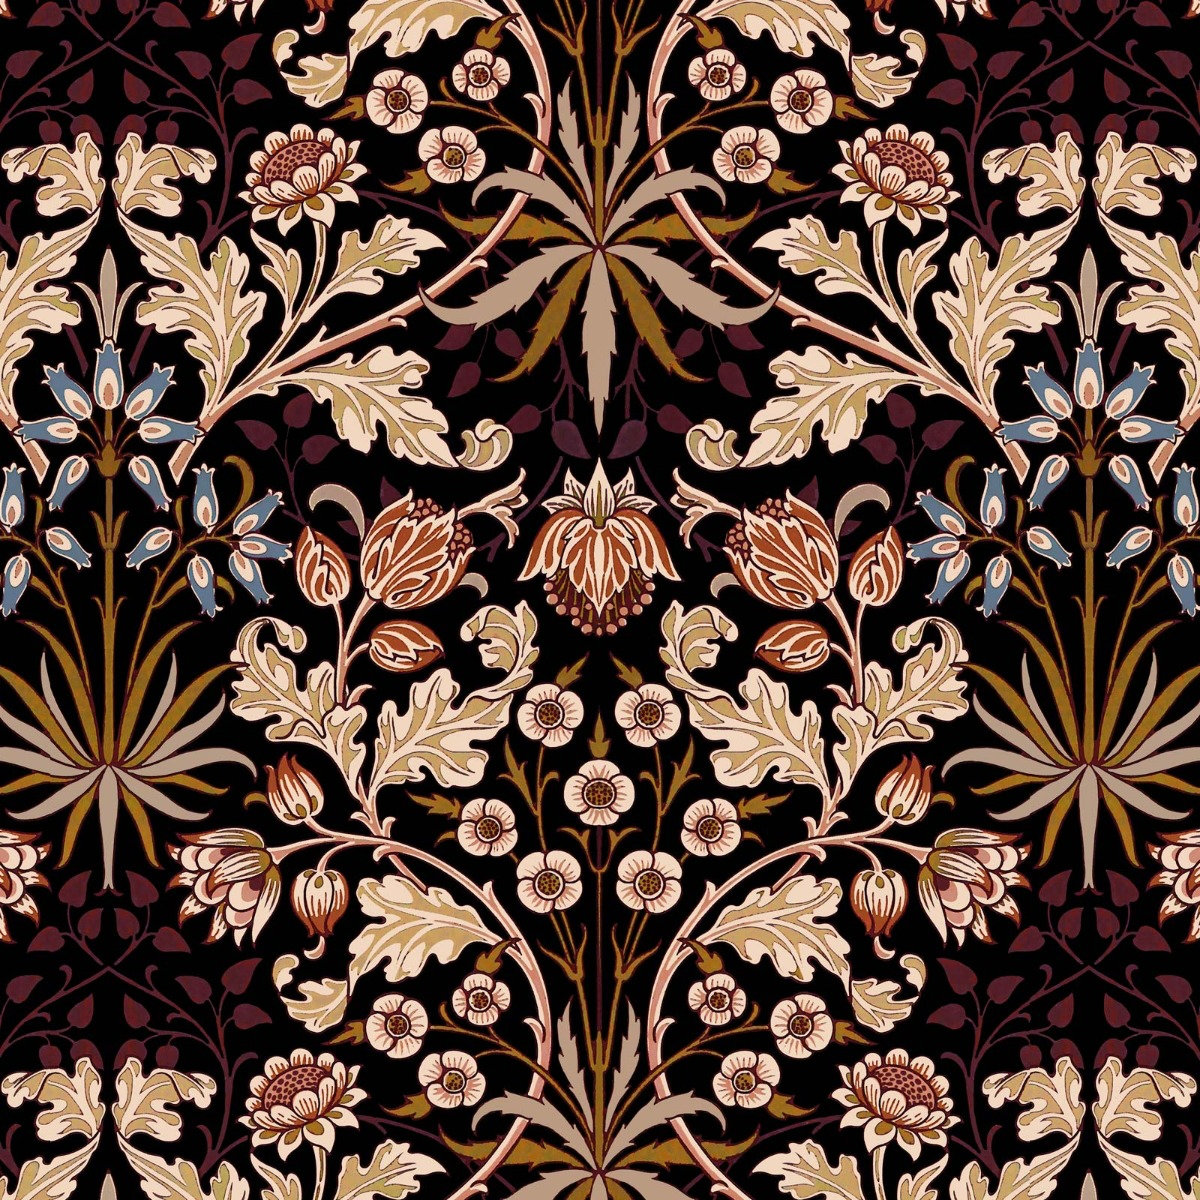 A print by JH Dearle of William Morris Hyacinth wallpaper design News  Photo  Getty Images